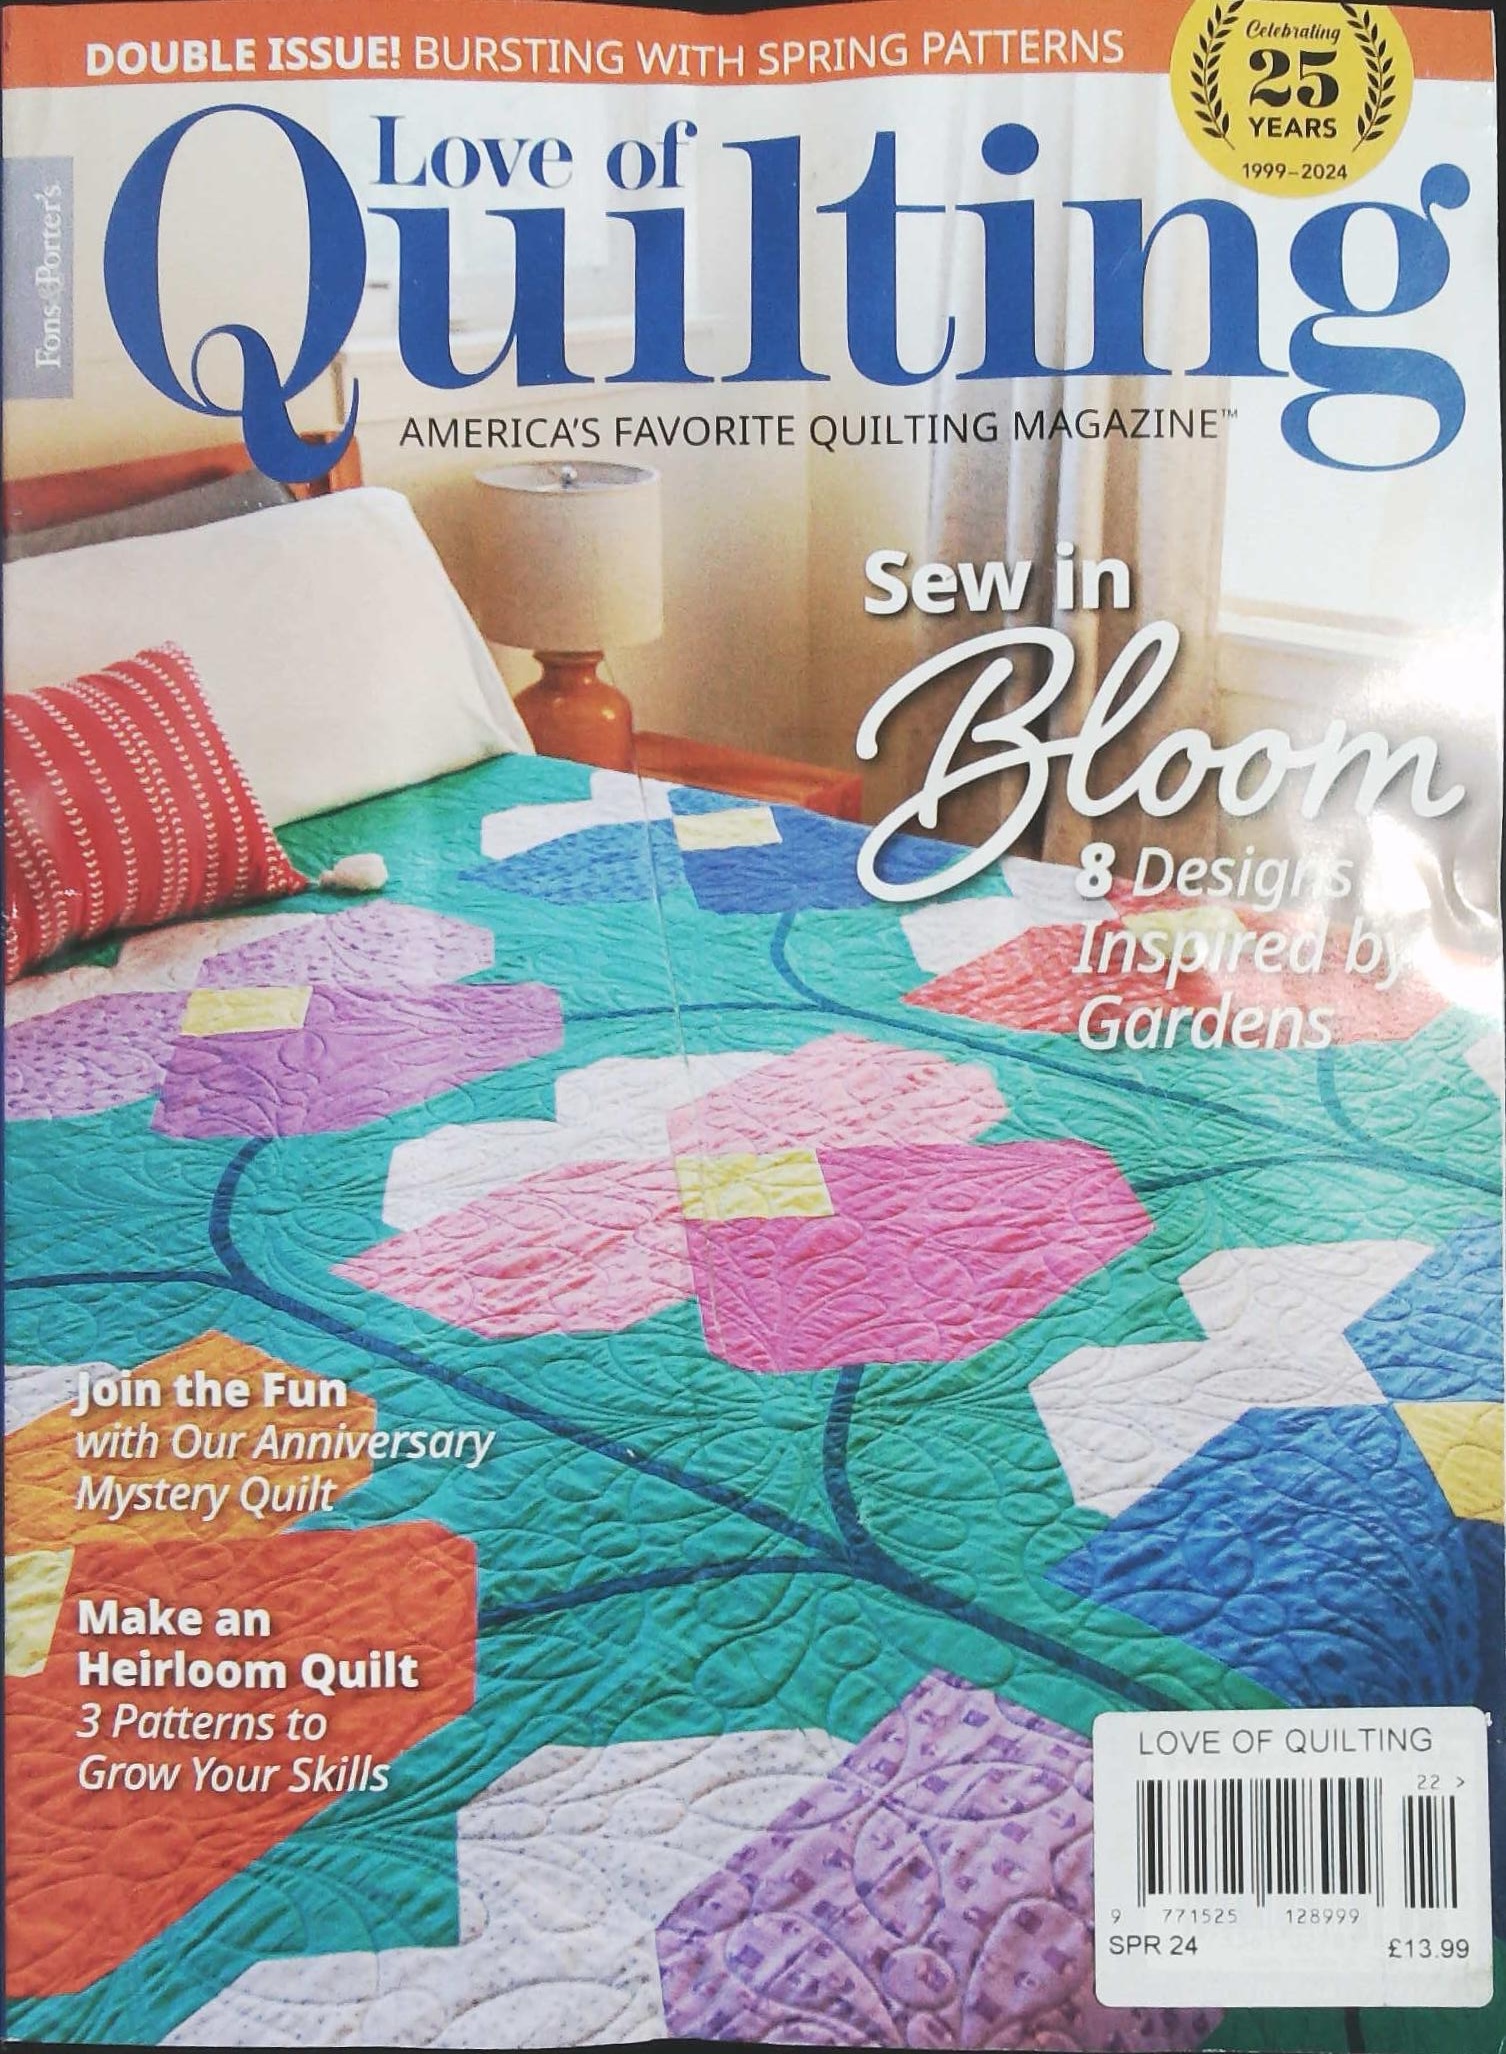 LOVE OF QUILTING